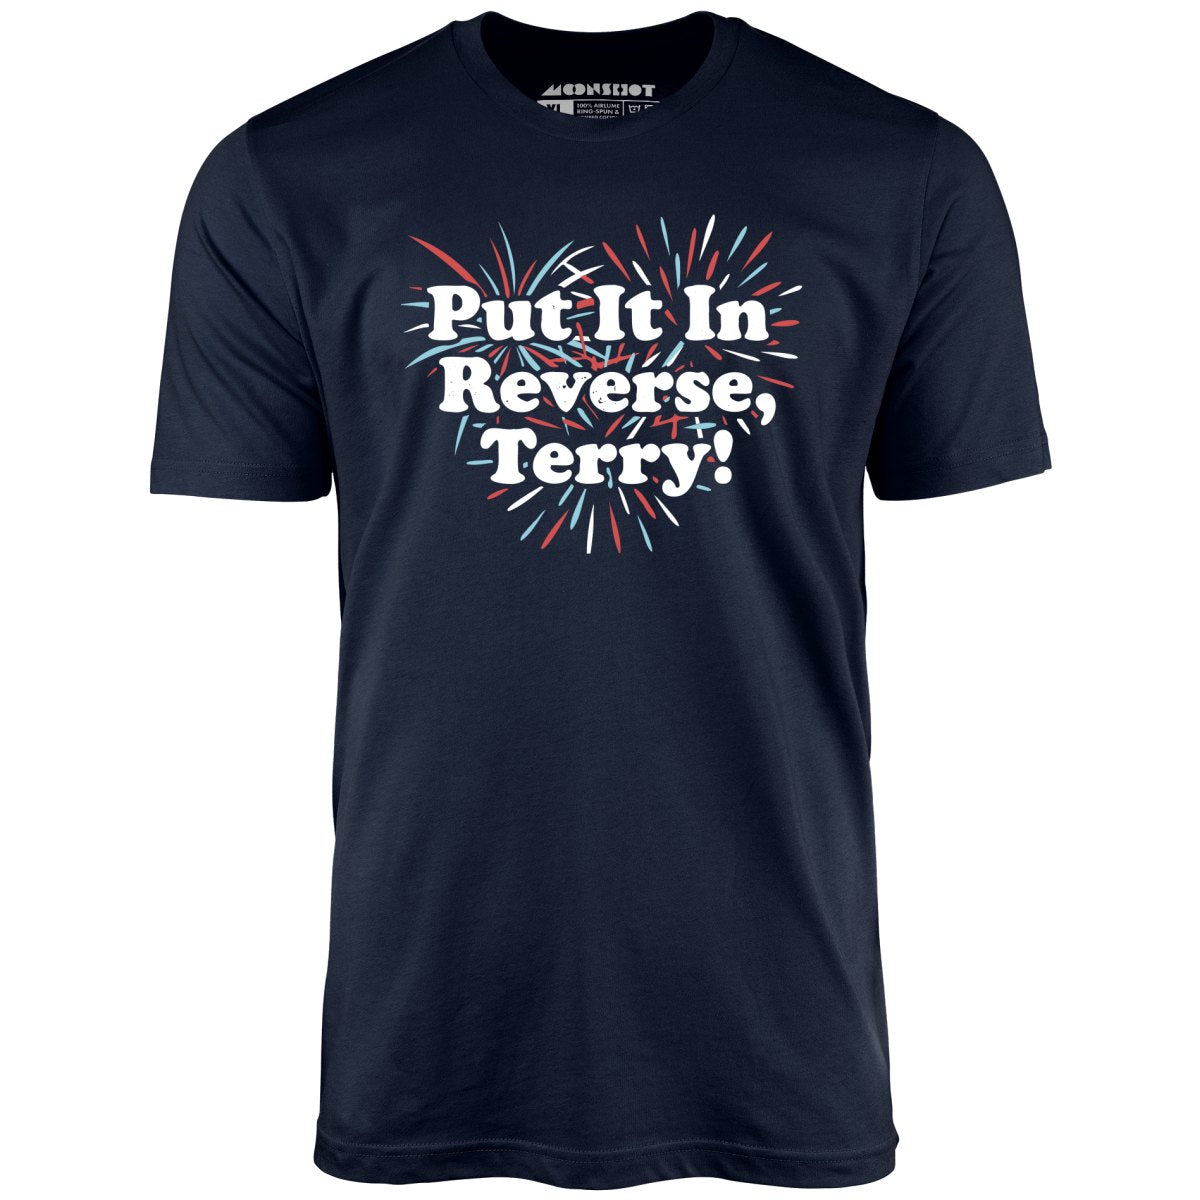 Put It In Reverse, Terry! - Unisex T-Shirt